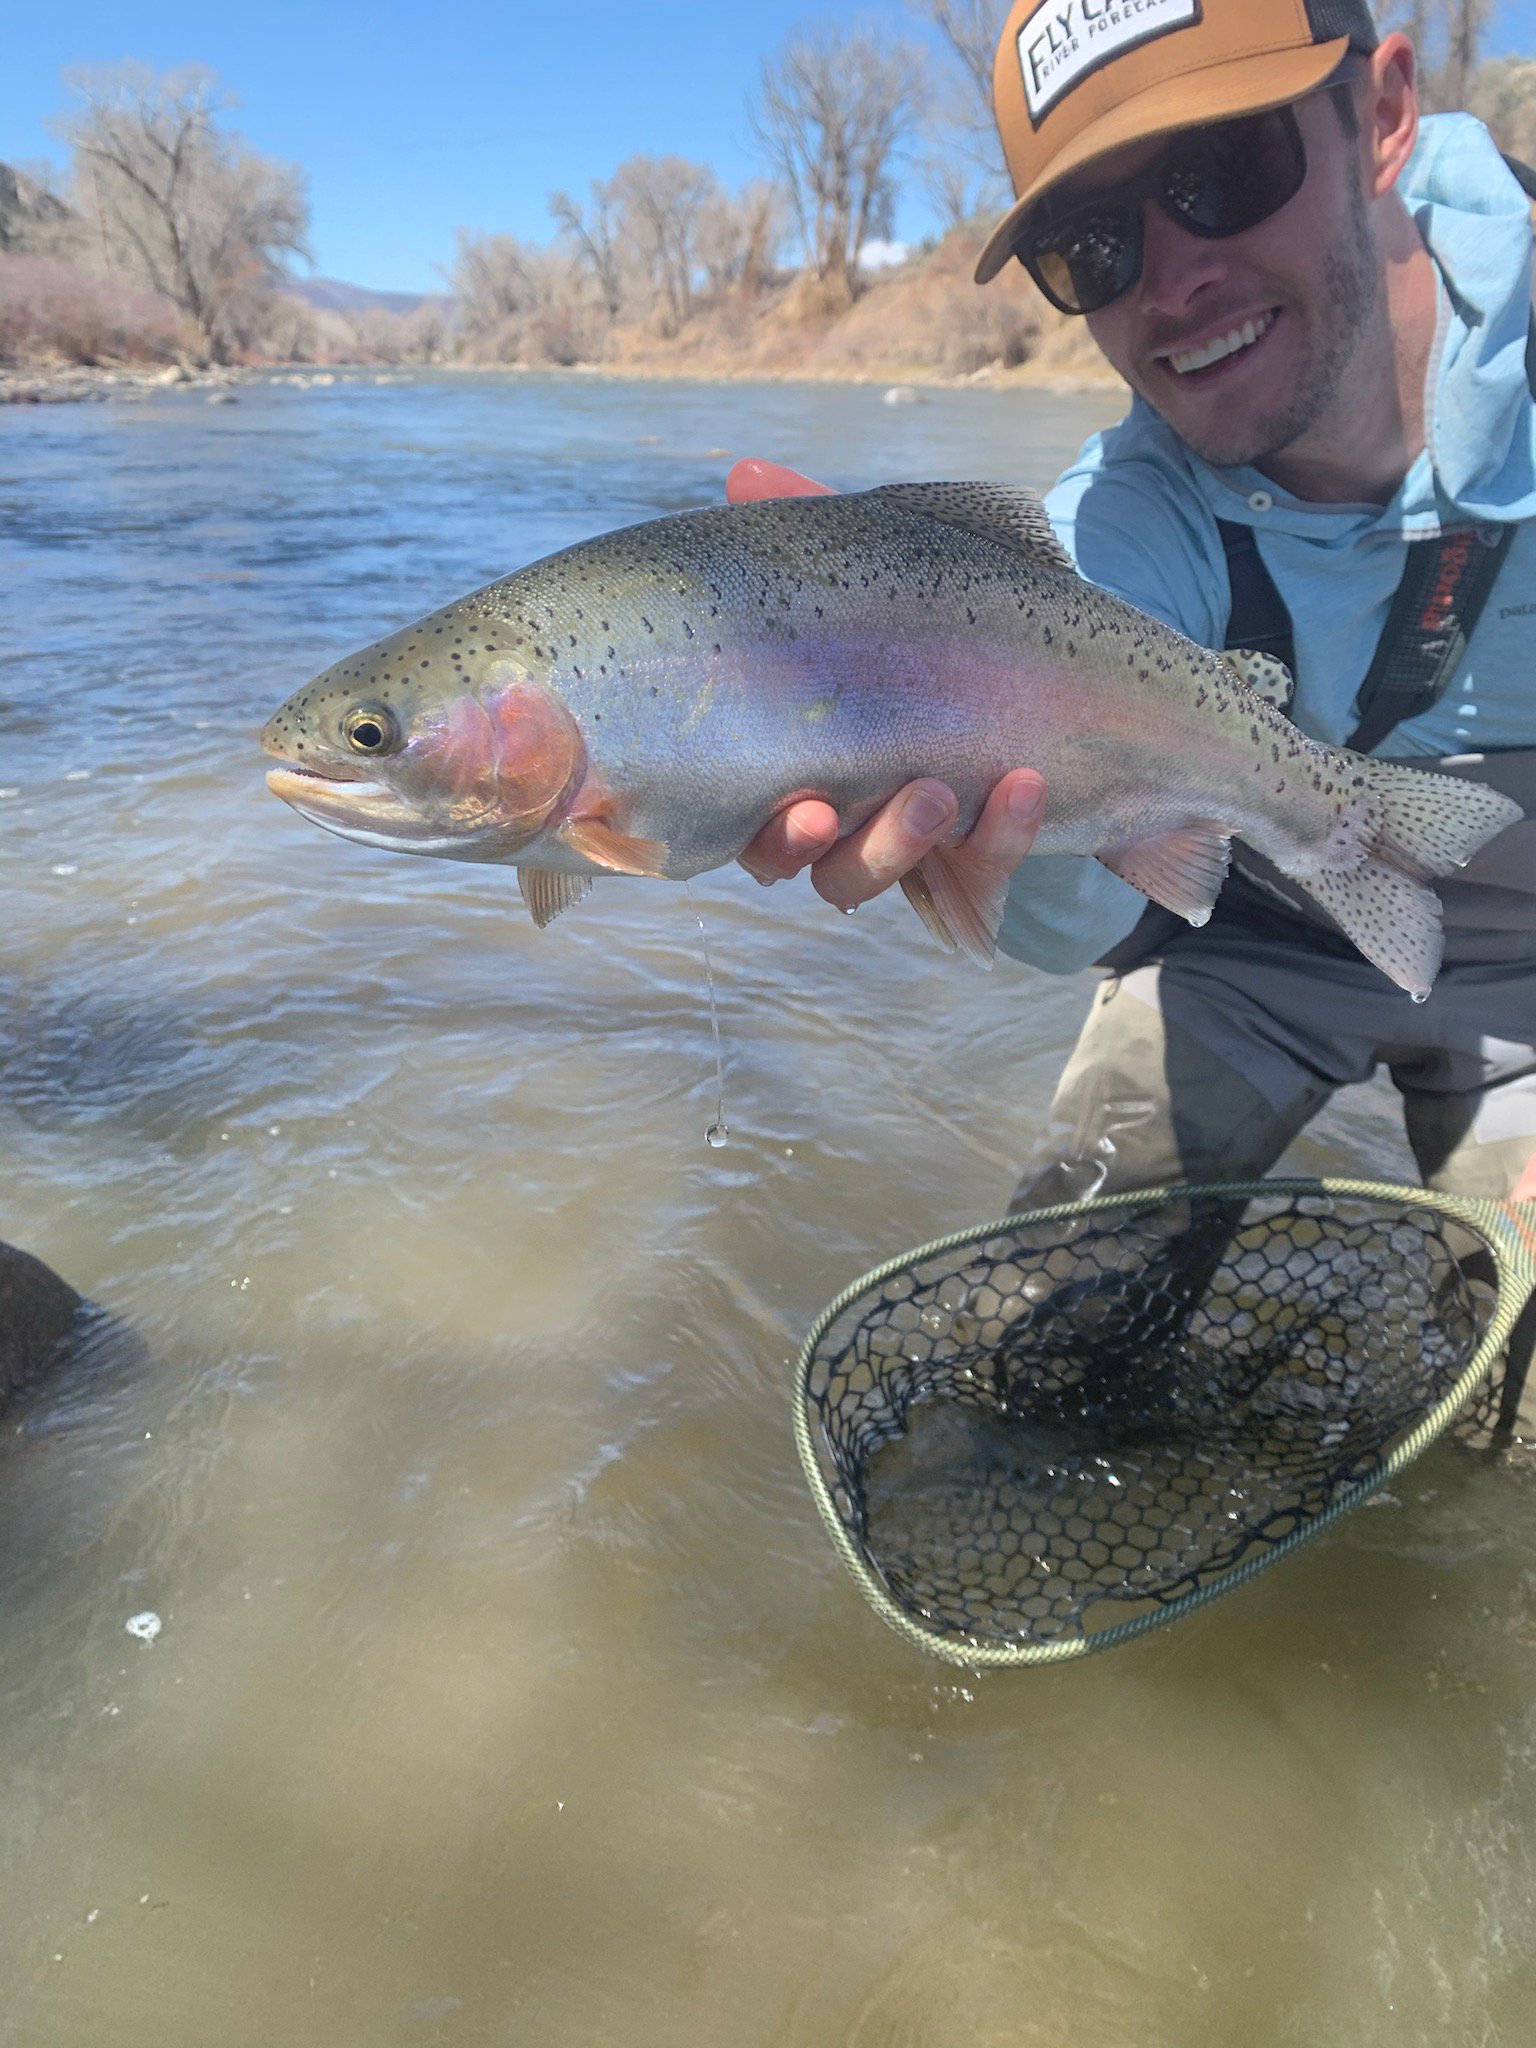 Spring Fishing - off colored water